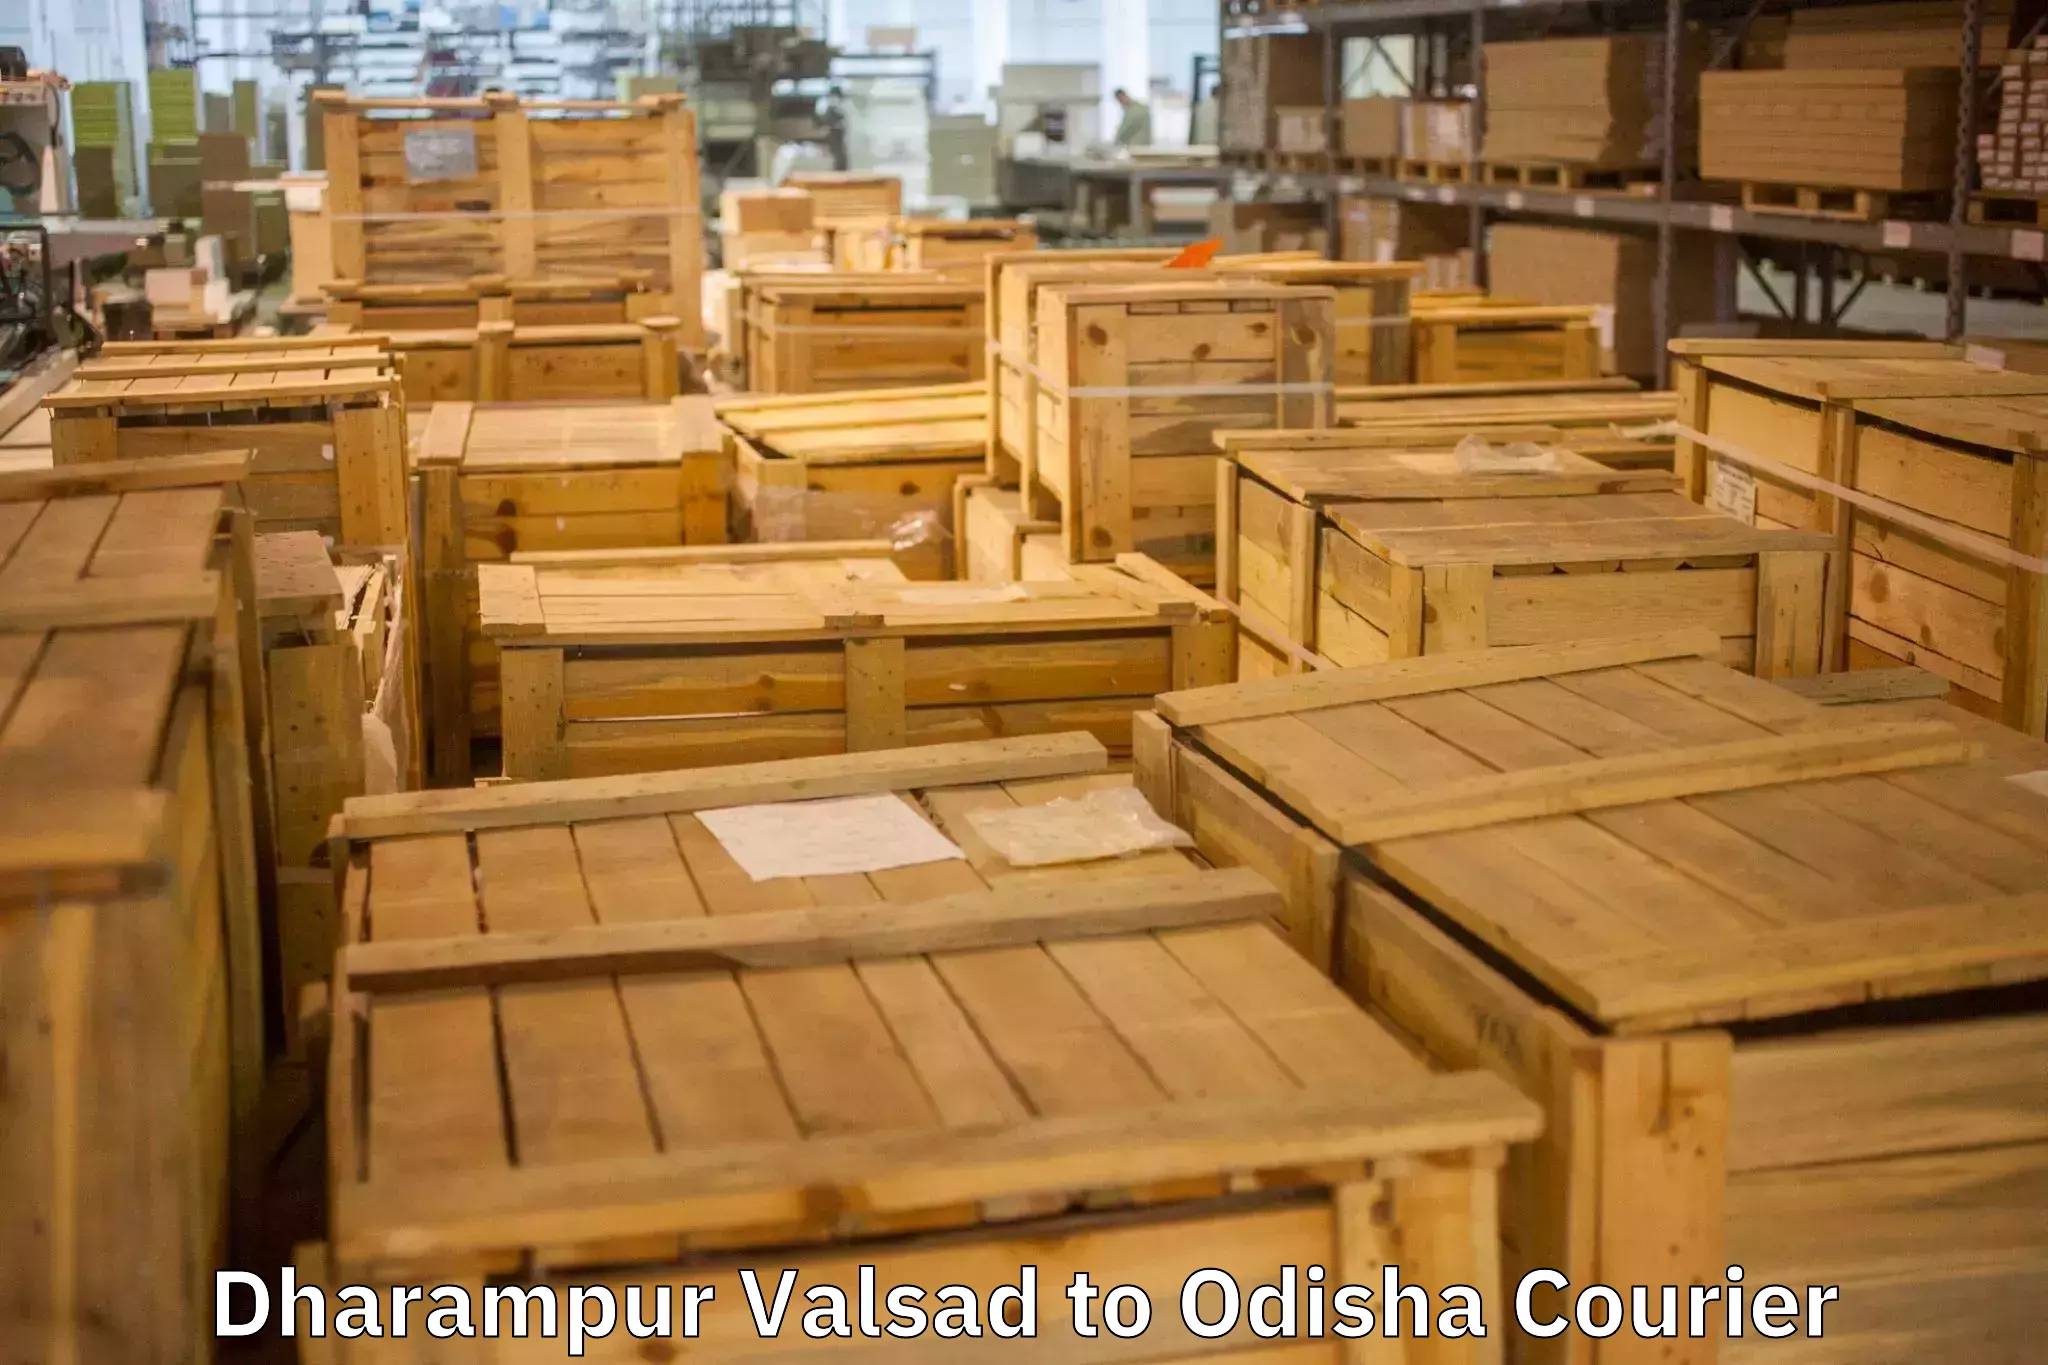 Dependable moving services Dharampur Valsad to Barbil